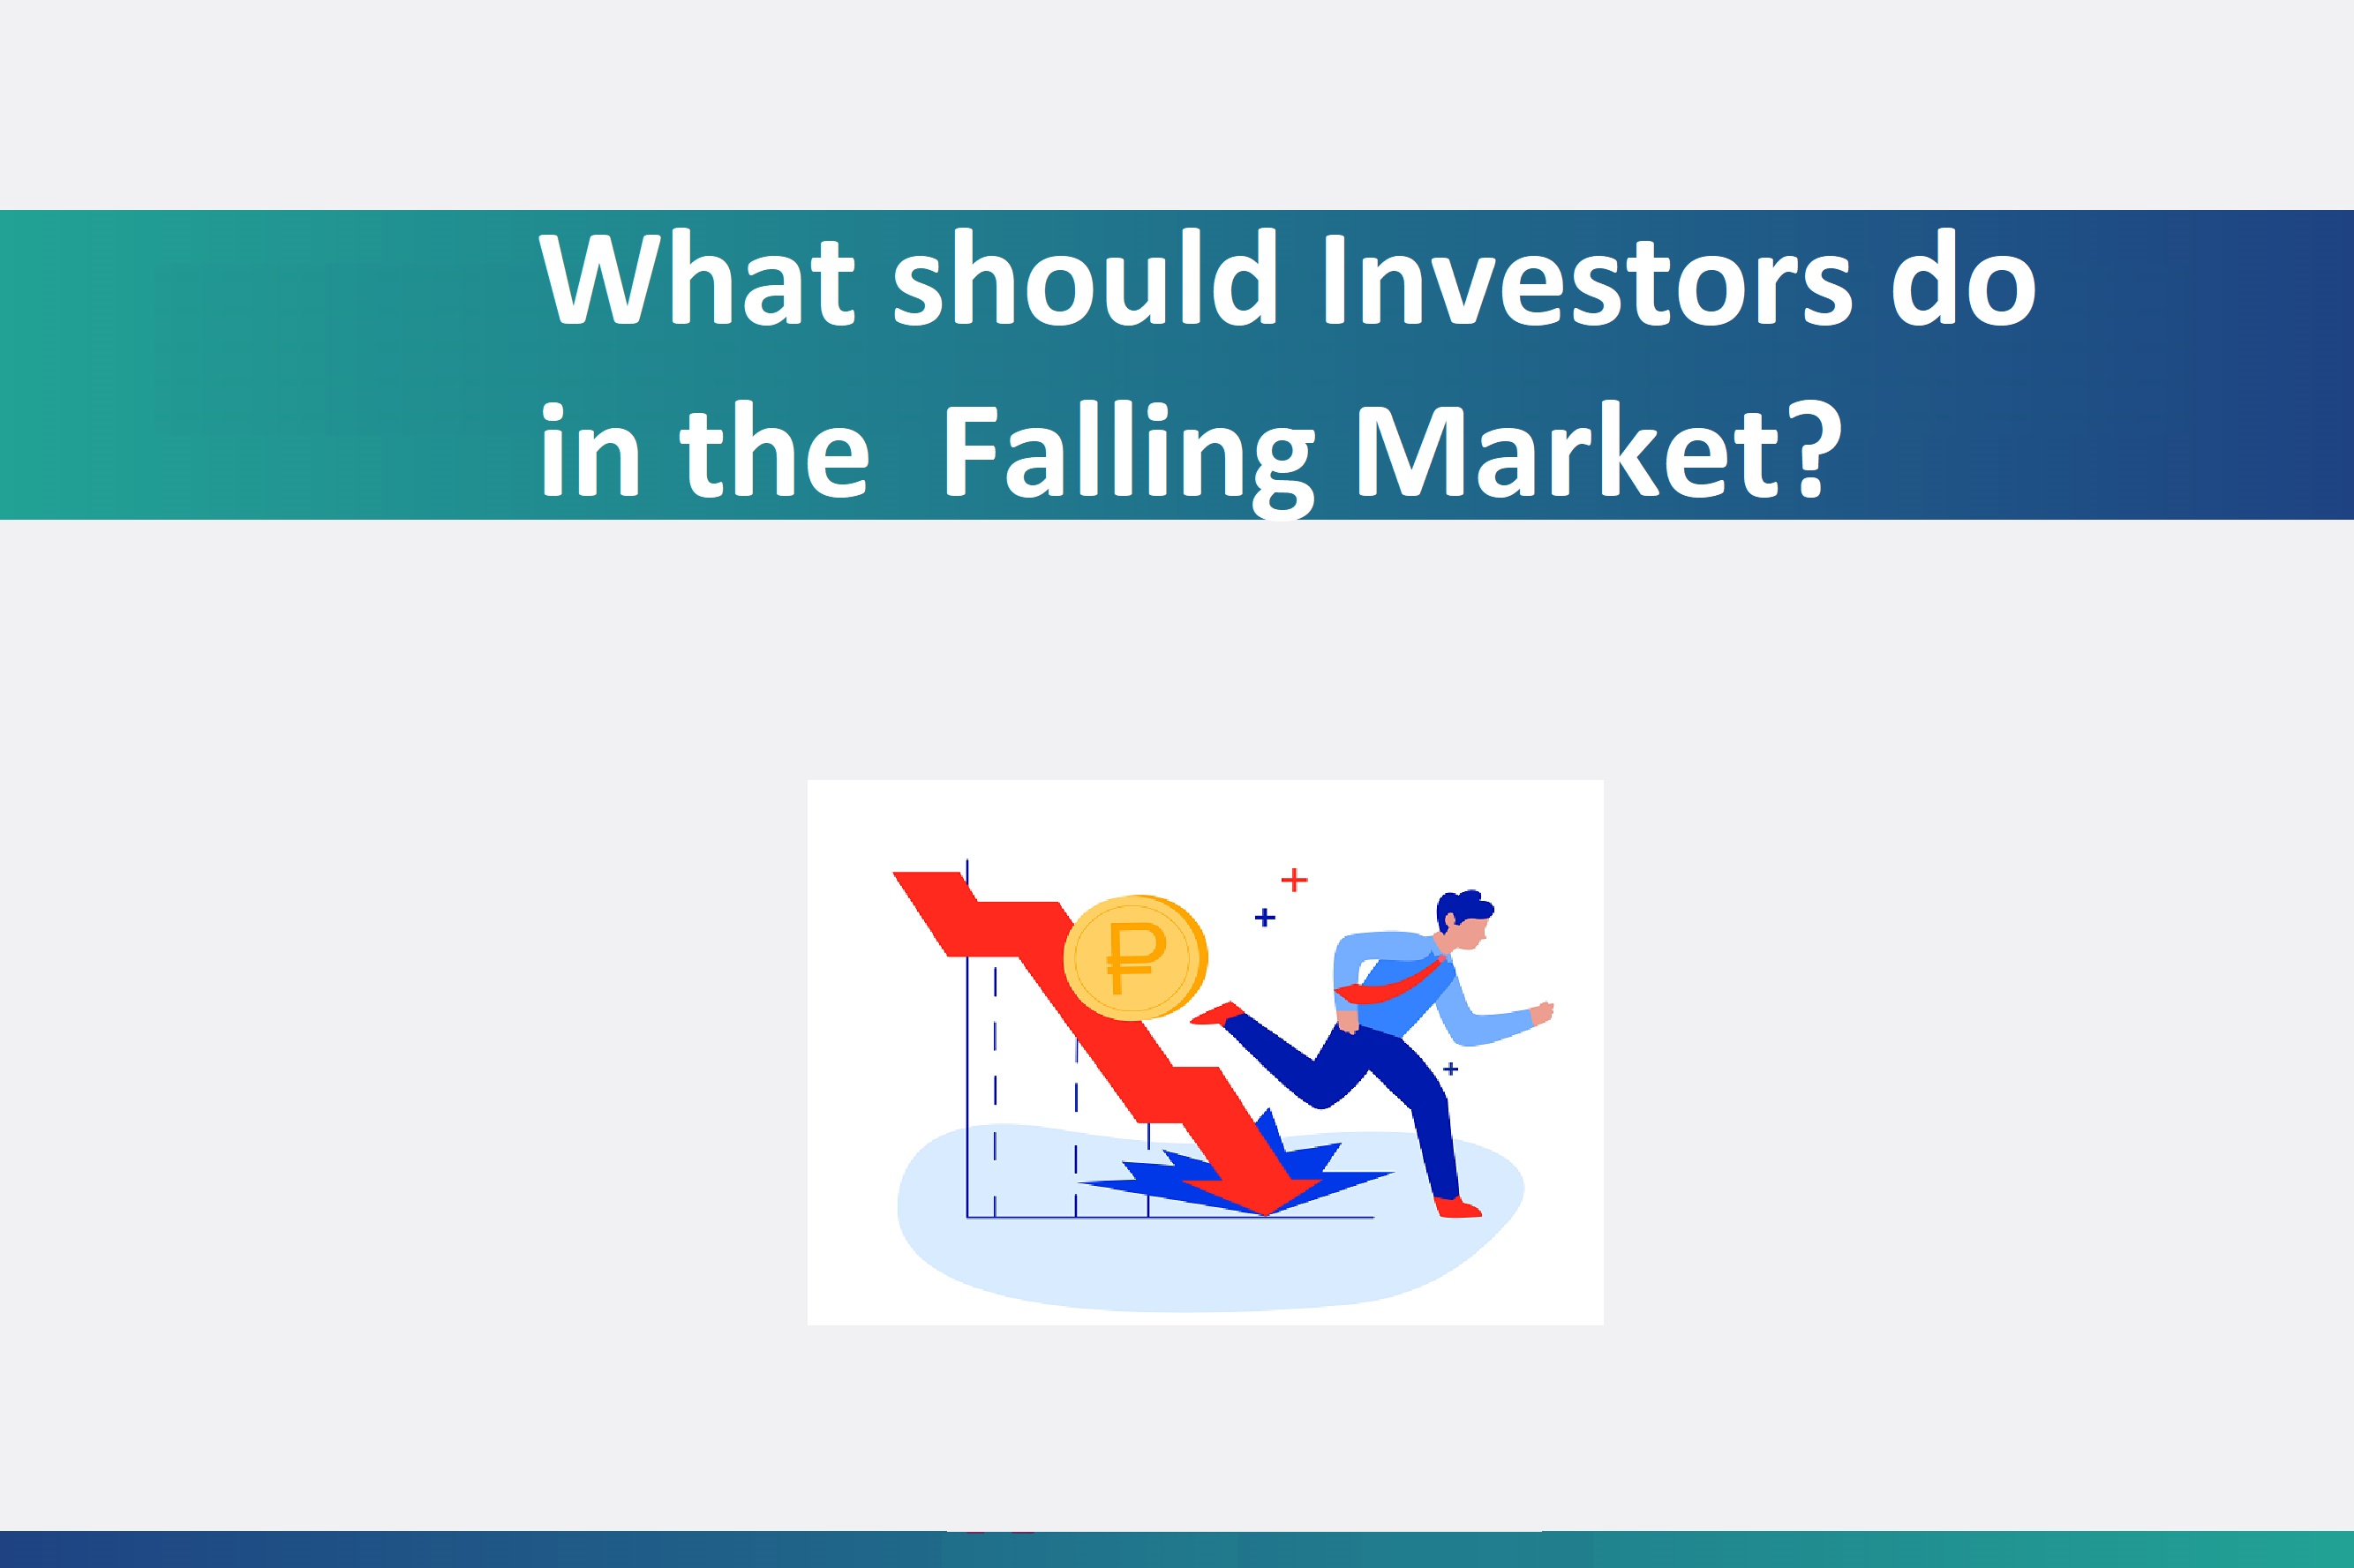 What should Investors do in the Falling Market?